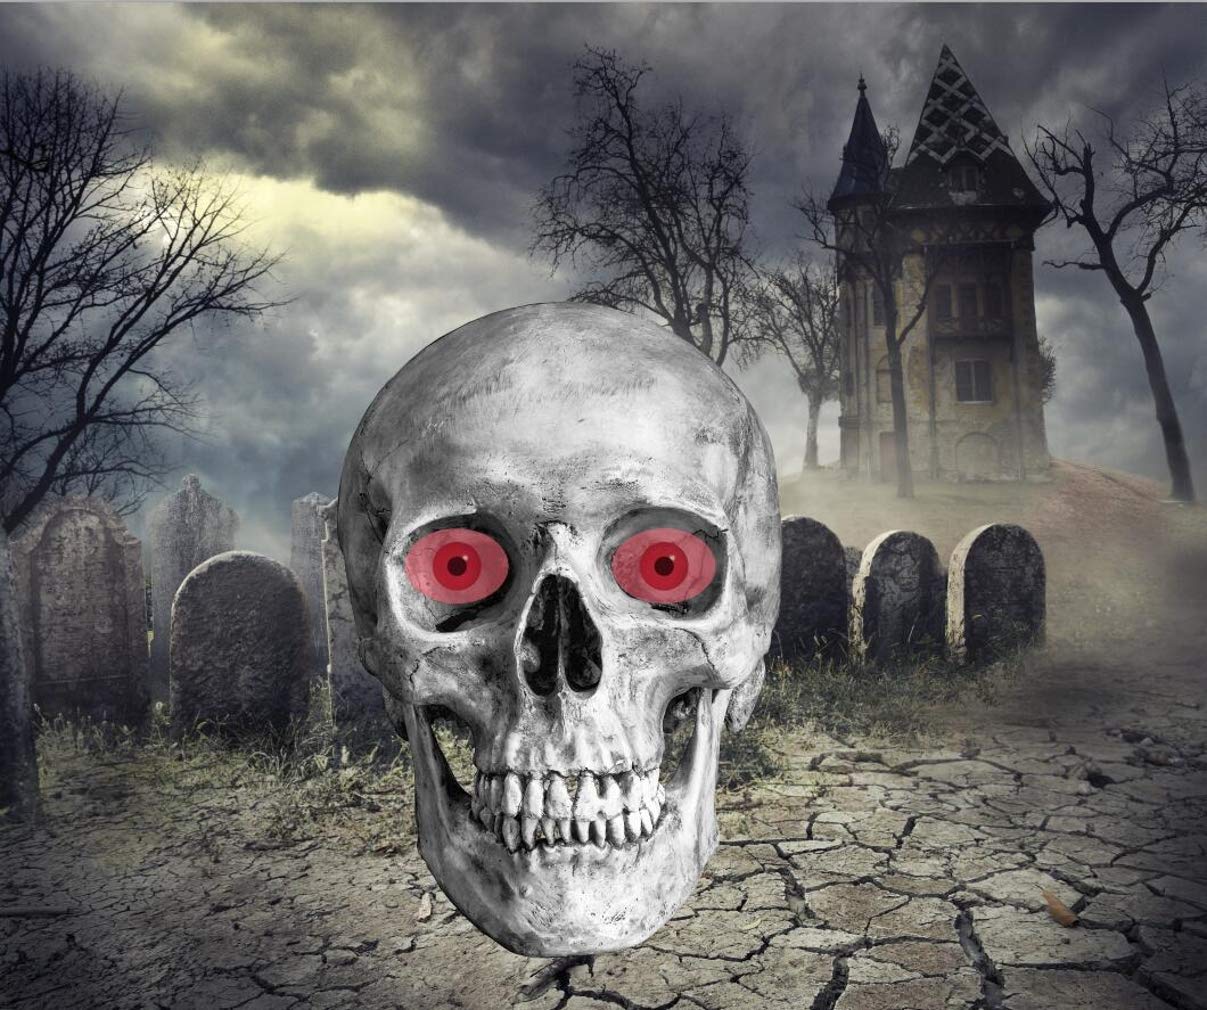 Spooky Scary Halloween Backgrounds - 1207x1010 Wallpaper 